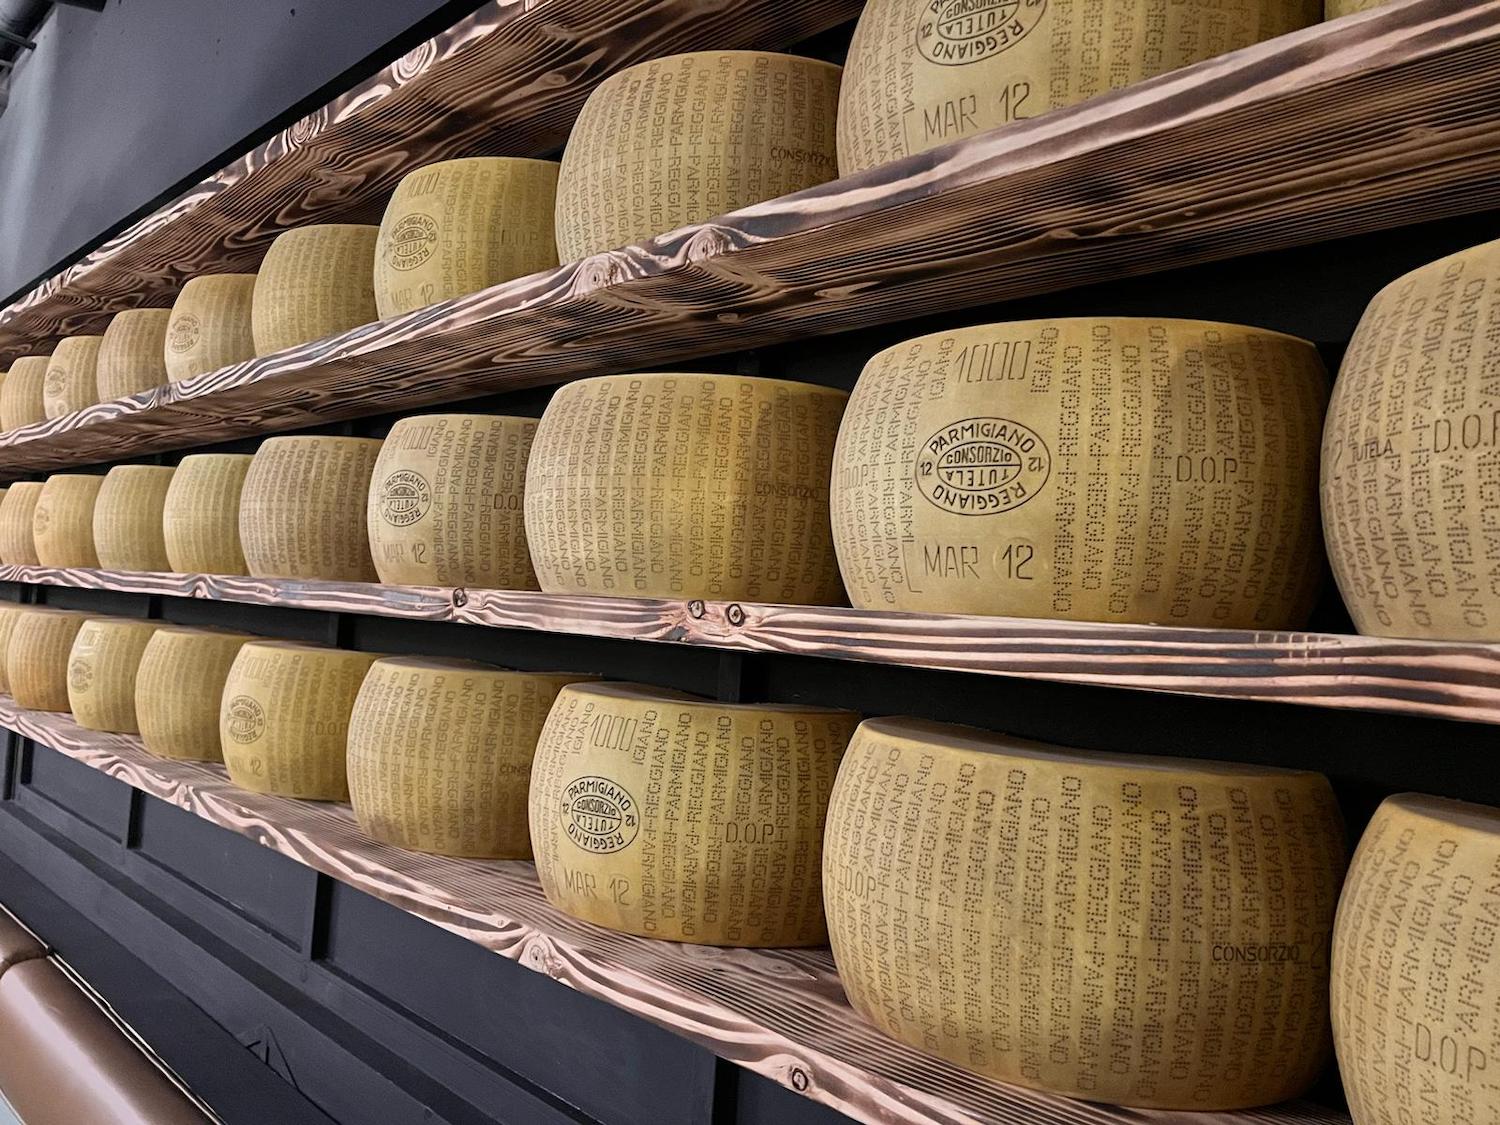 Wheels of cheese from Vincenzo Cucina & Lounge opening in Little Italy, San Diego this week